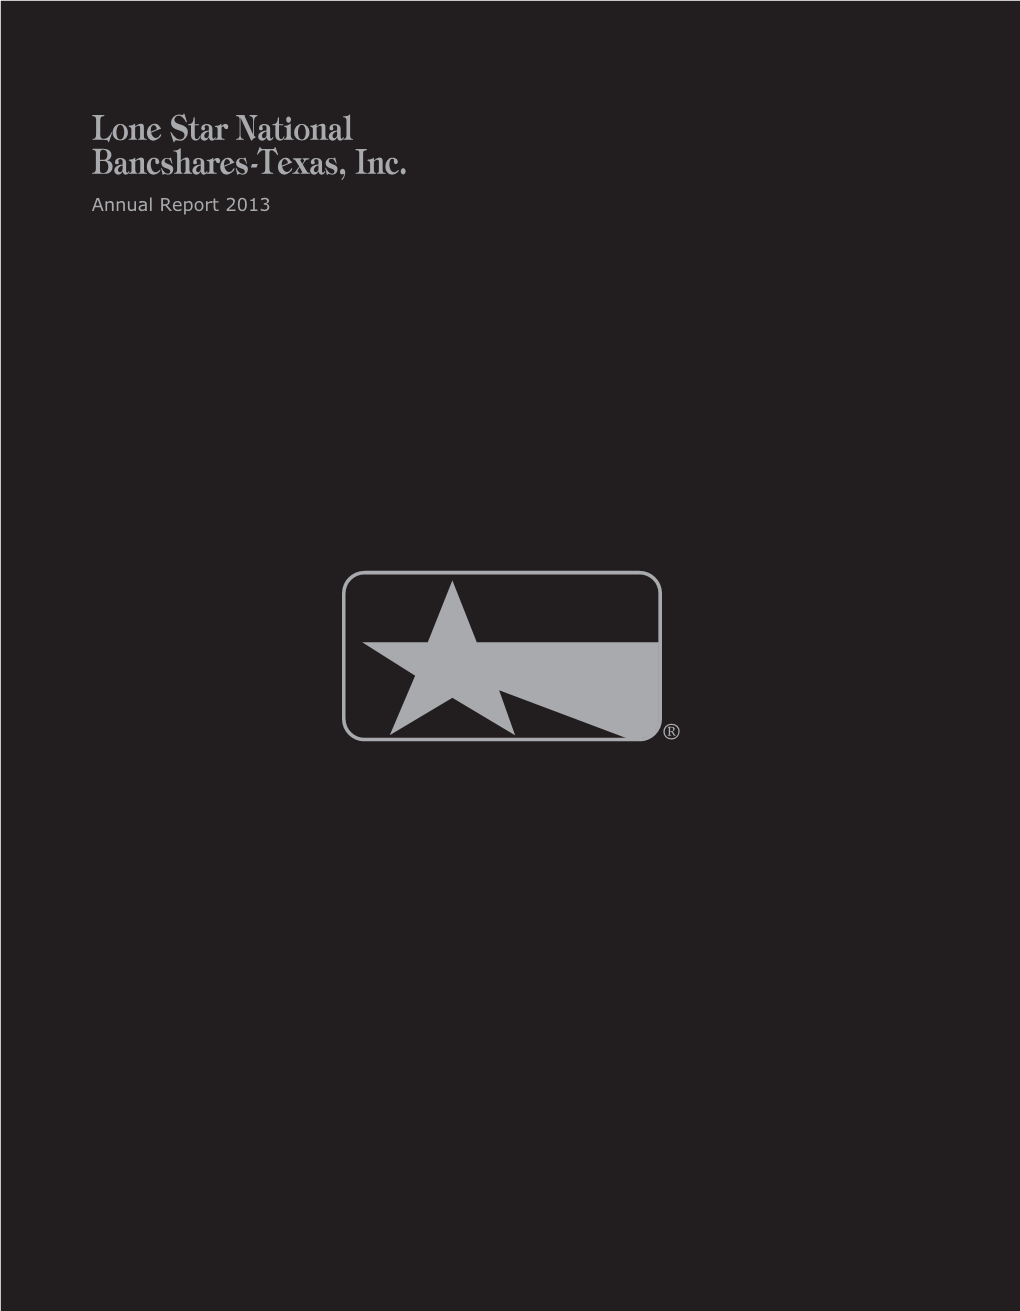 Lone Star National Bancshares-Texas, Inc. Annual Report 2013